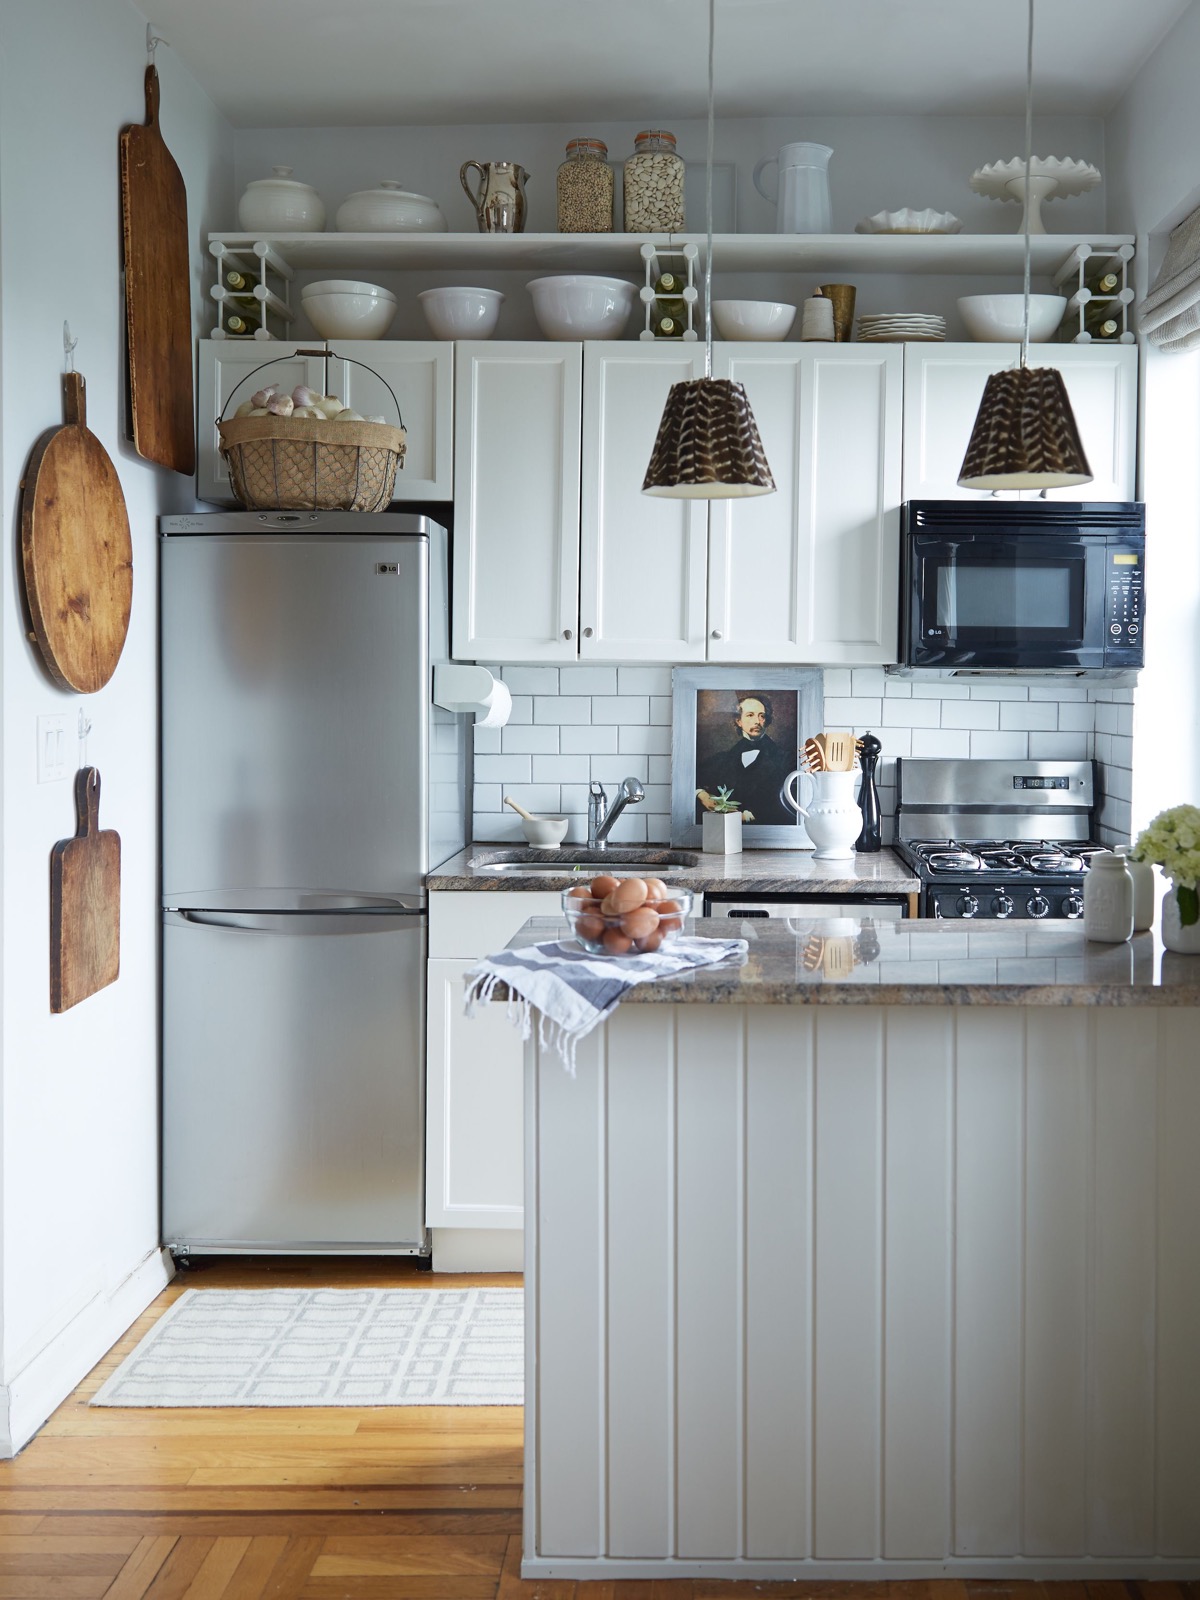 18 Splendid Small Kitchens And Ideas You Can Use From Them